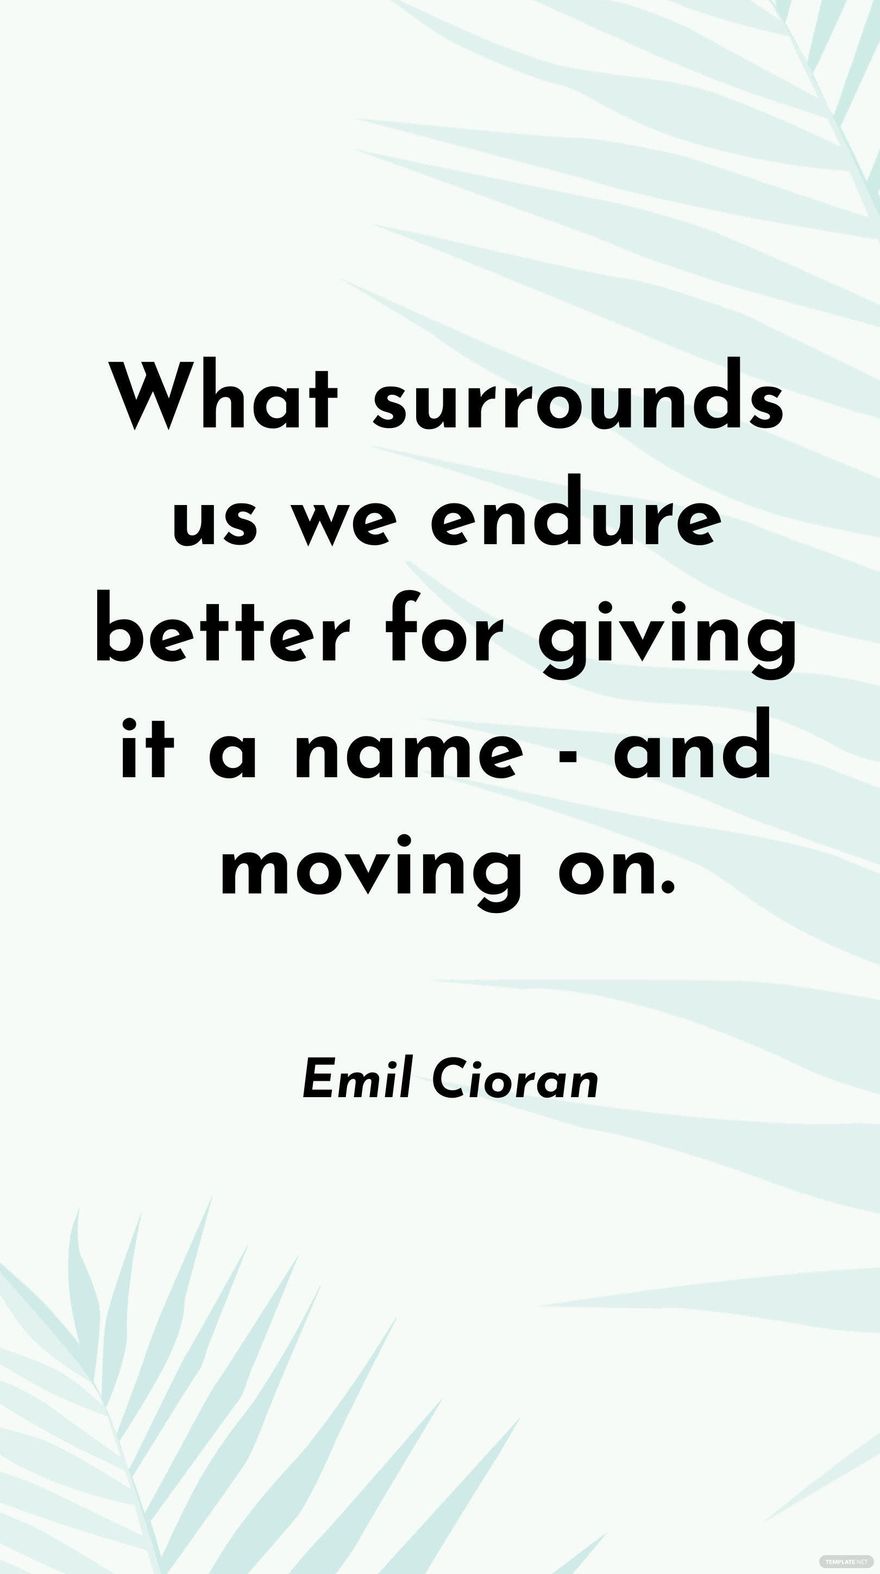 Free Emil Cioran - What surrounds us we endure better for giving it a name - and moving on.